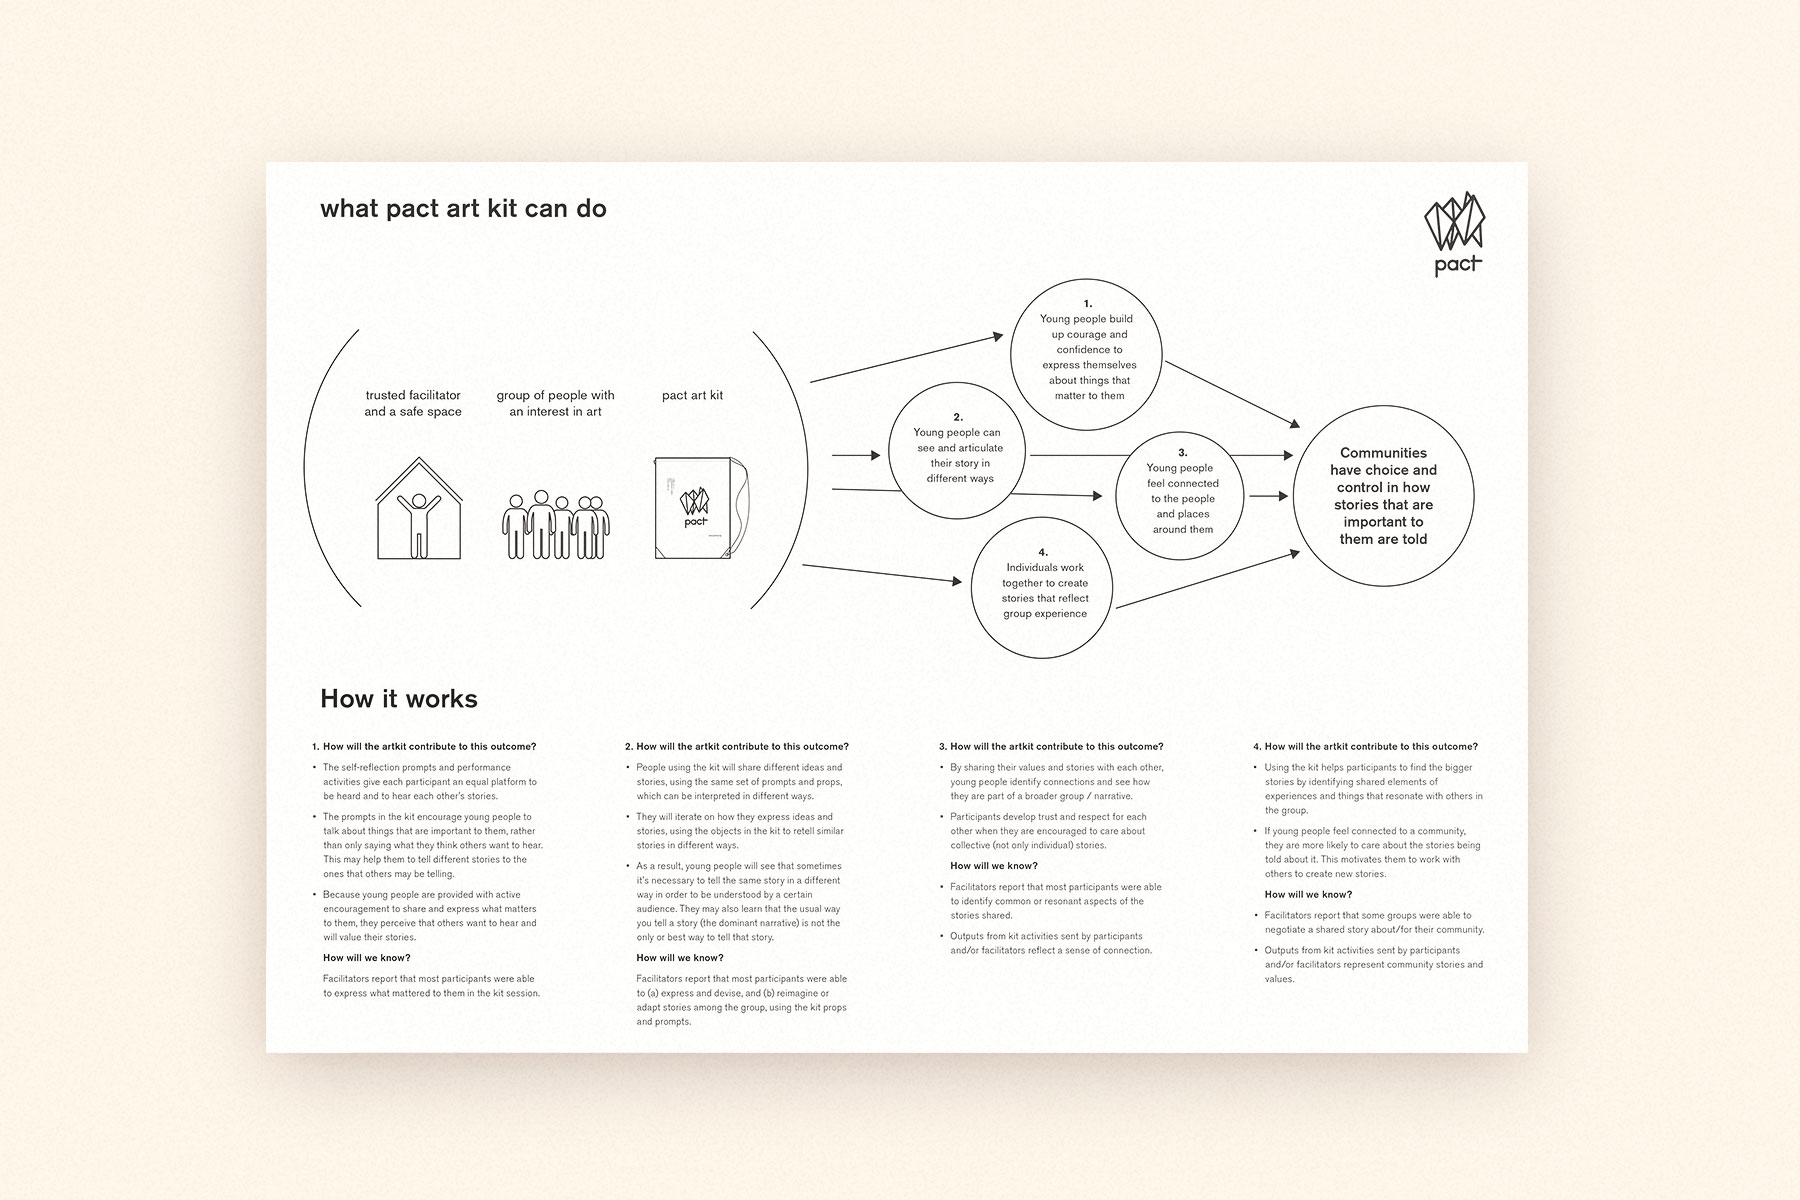 The back of the artkit instructions showing the theory of change and how to evaluate its effectiveness